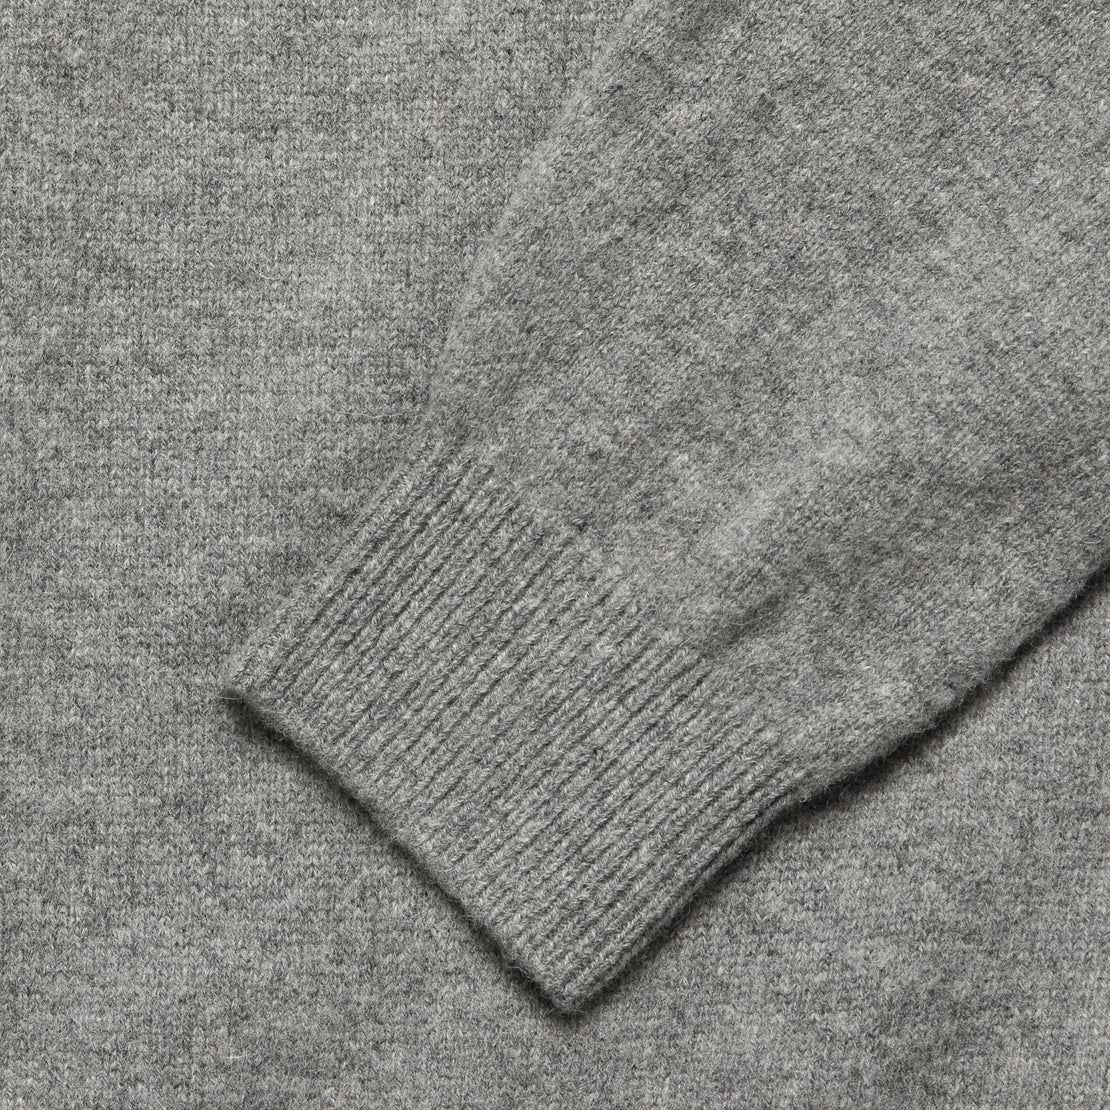 Merino Crew Sweater - Grey - BEAMS+ - STAG Provisions - Tops - Sweater